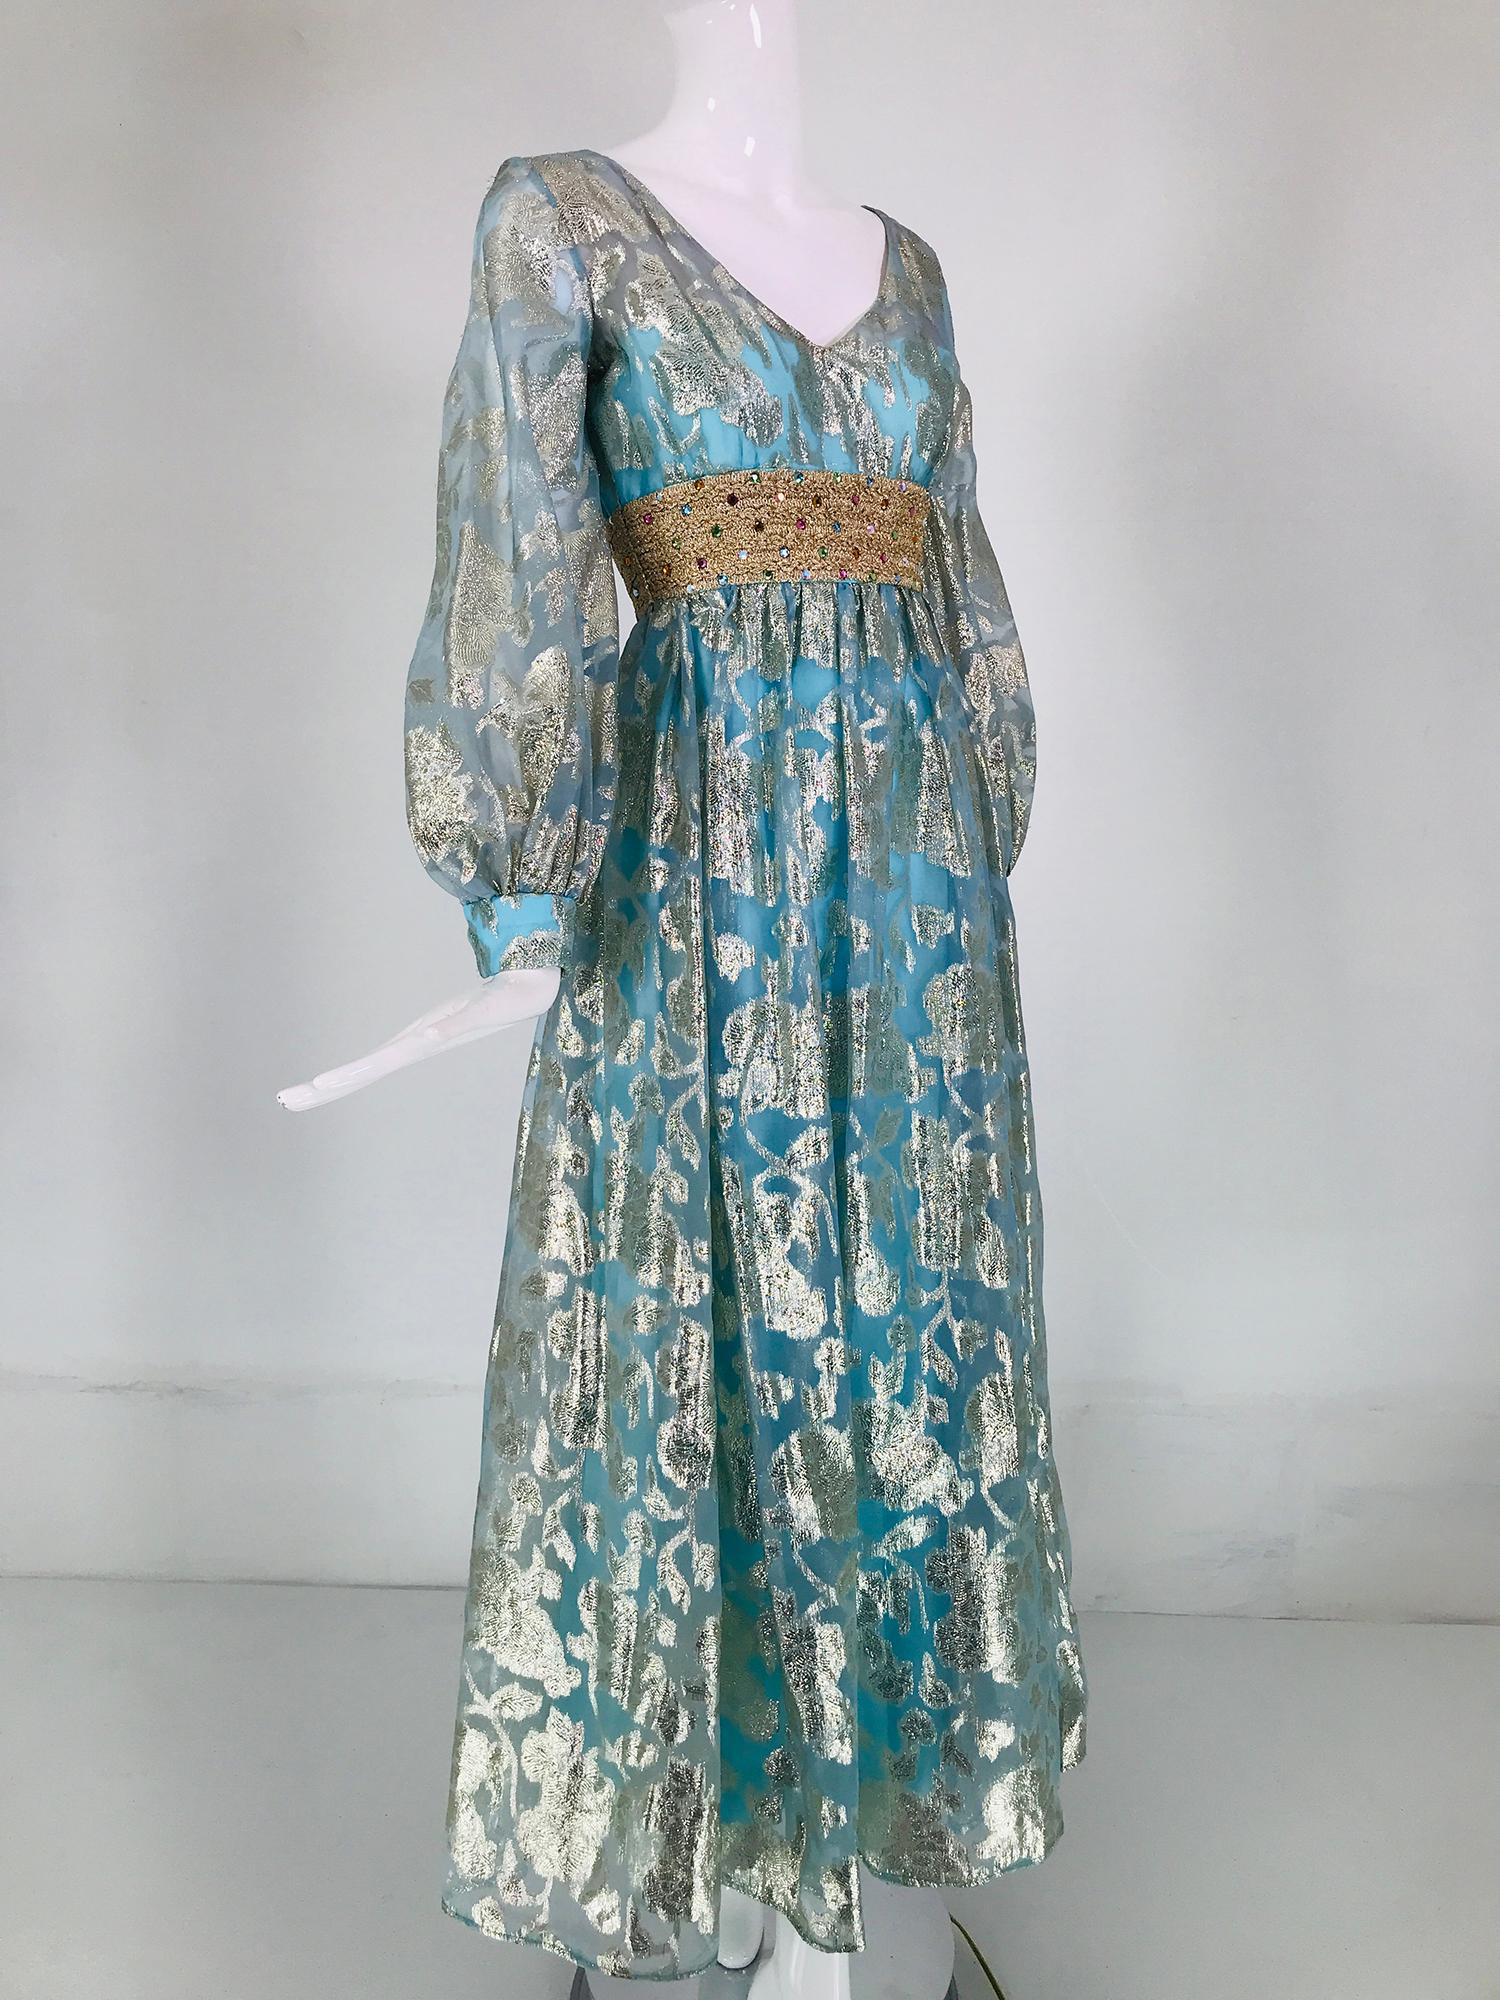 1970s silver metallic blue organza jewel waist maxi dress. Beautiful shade of Tiffany blue with silver metallic design maxi dress, scoop neck, long sleeve dress has band cuffs that close with snaps. Fitted high waist bodice has a wide woven band